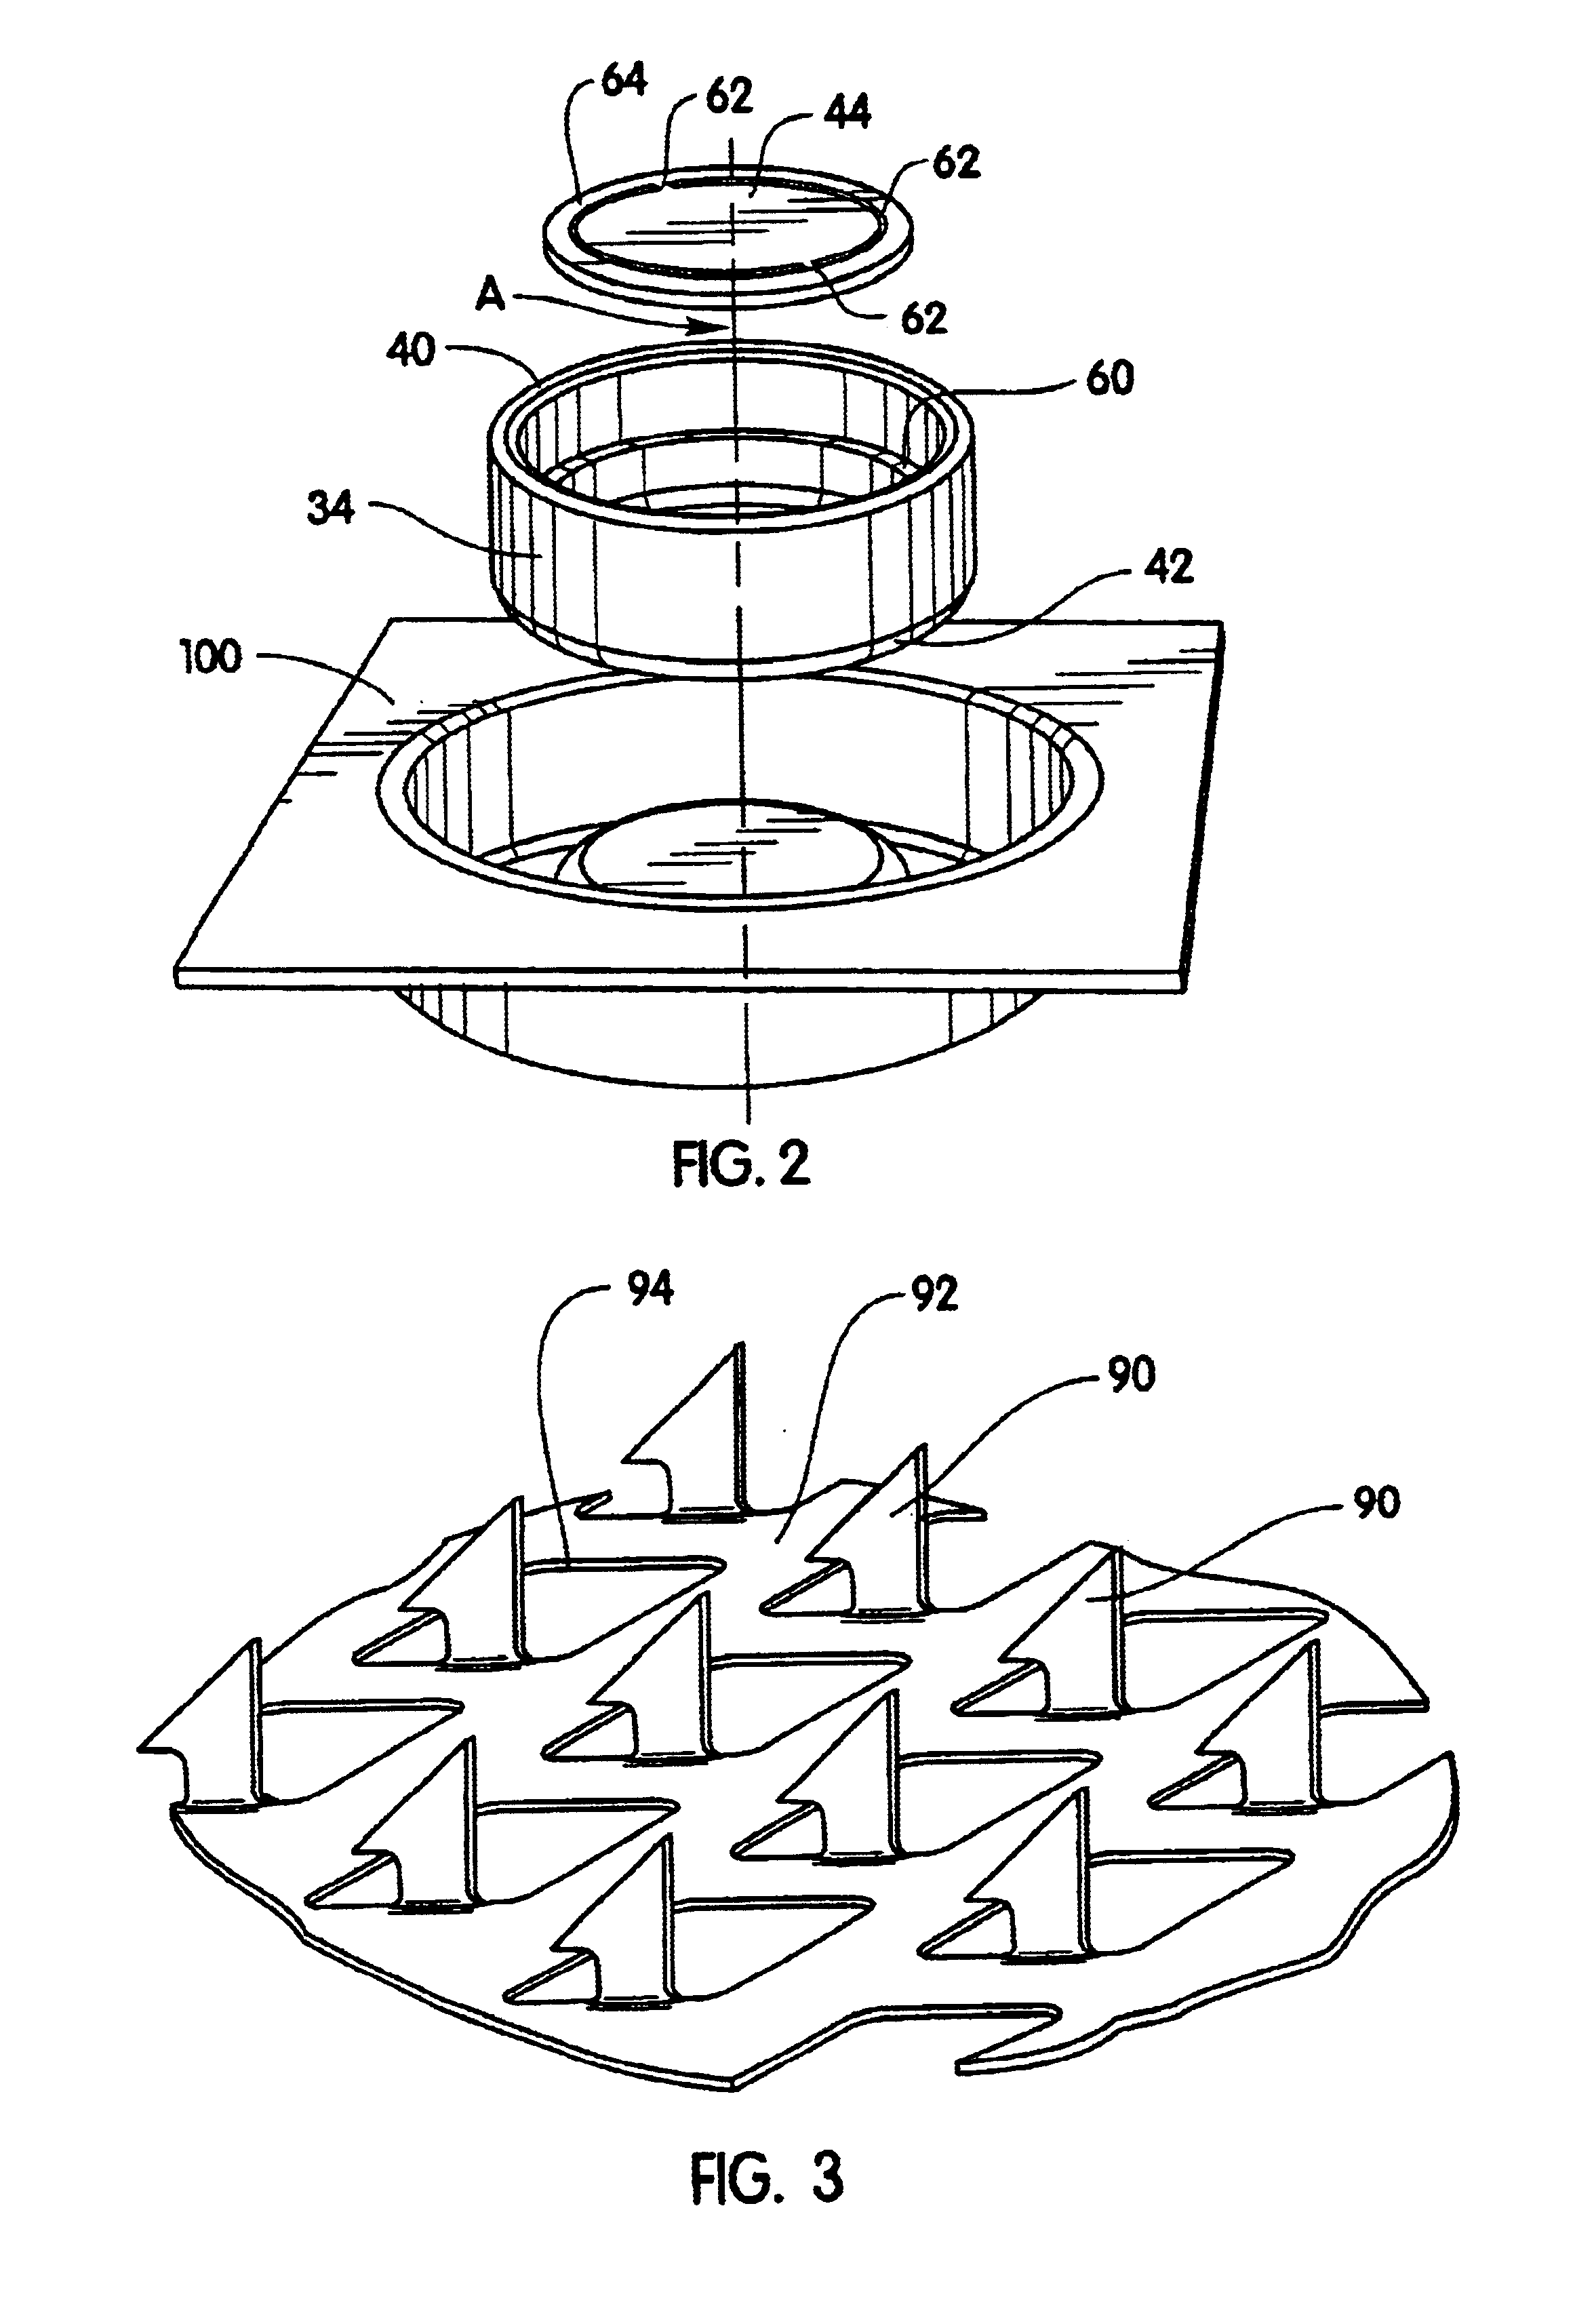 Microprotrusion member retainer for impact applicator